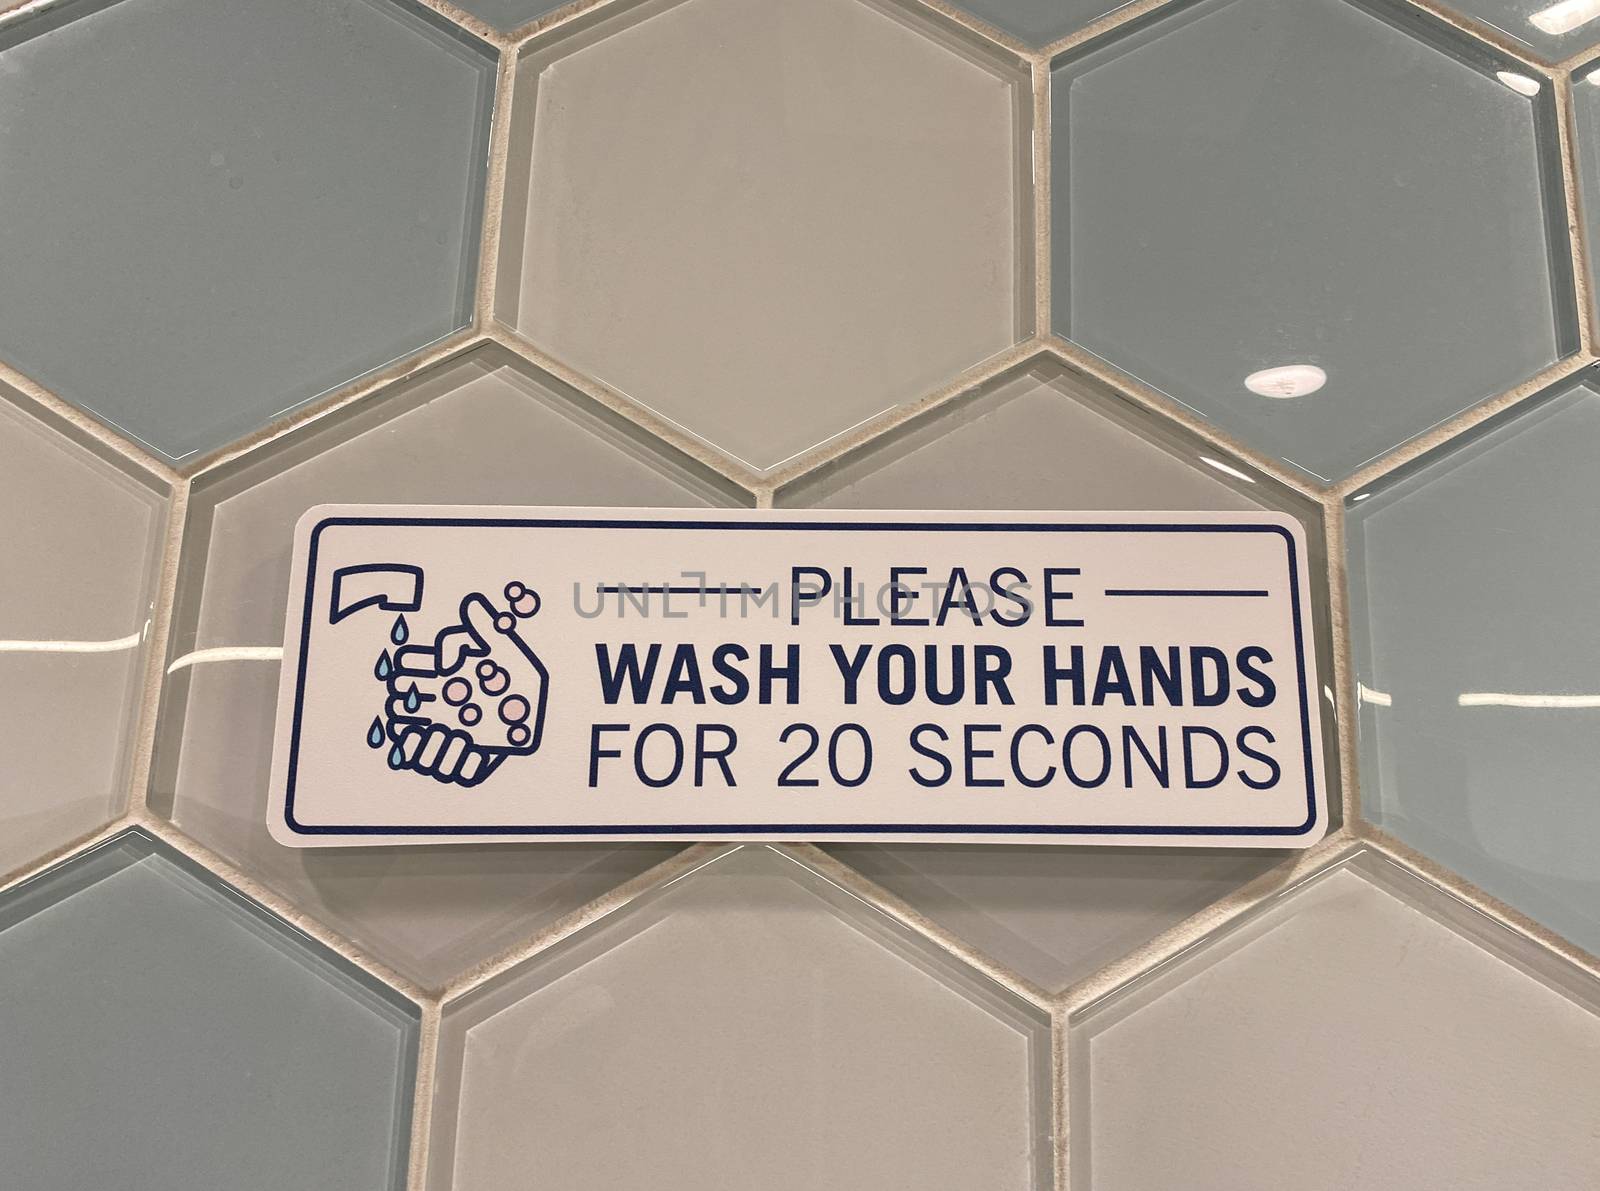 A sign in a public restroom that tells people to please wash your hands for 20 seconds due to the coronavirus pandemic.